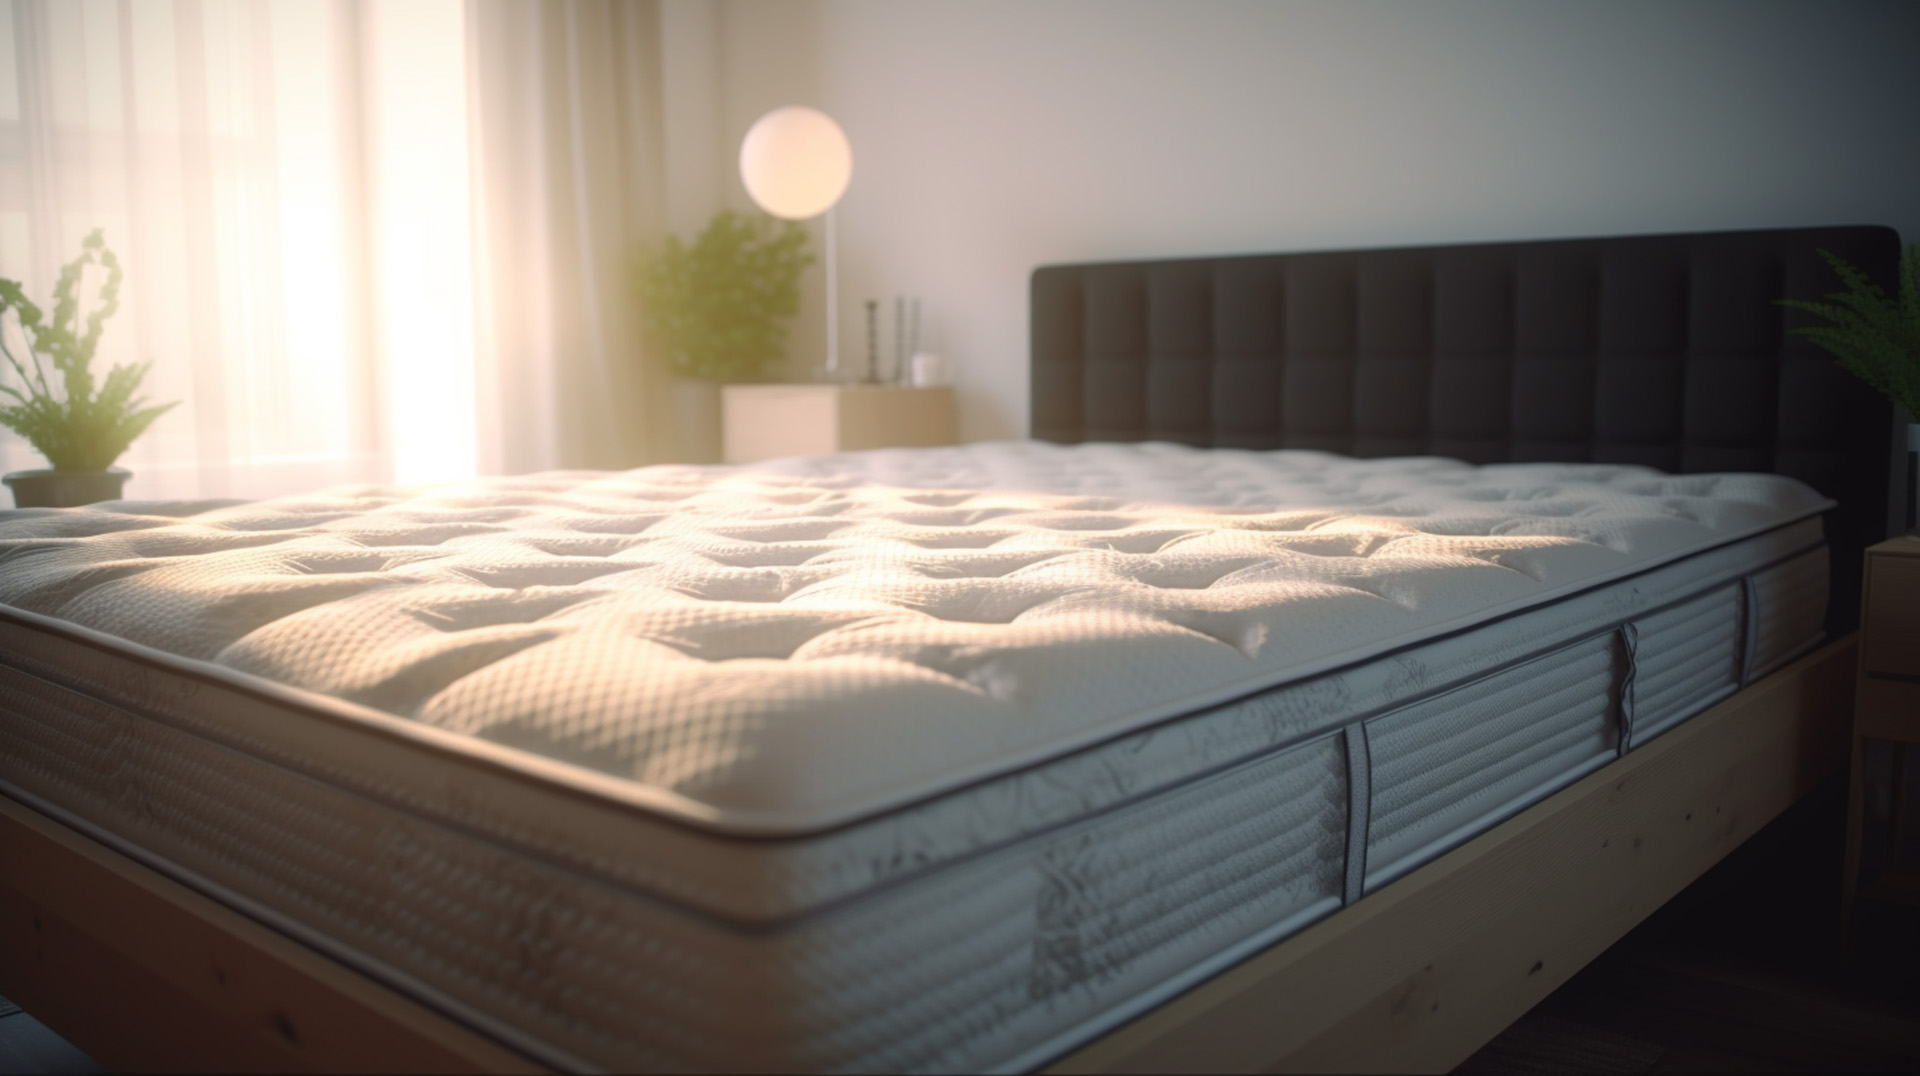 Shop Organic Mattresses and Beds in Inglewood, CA